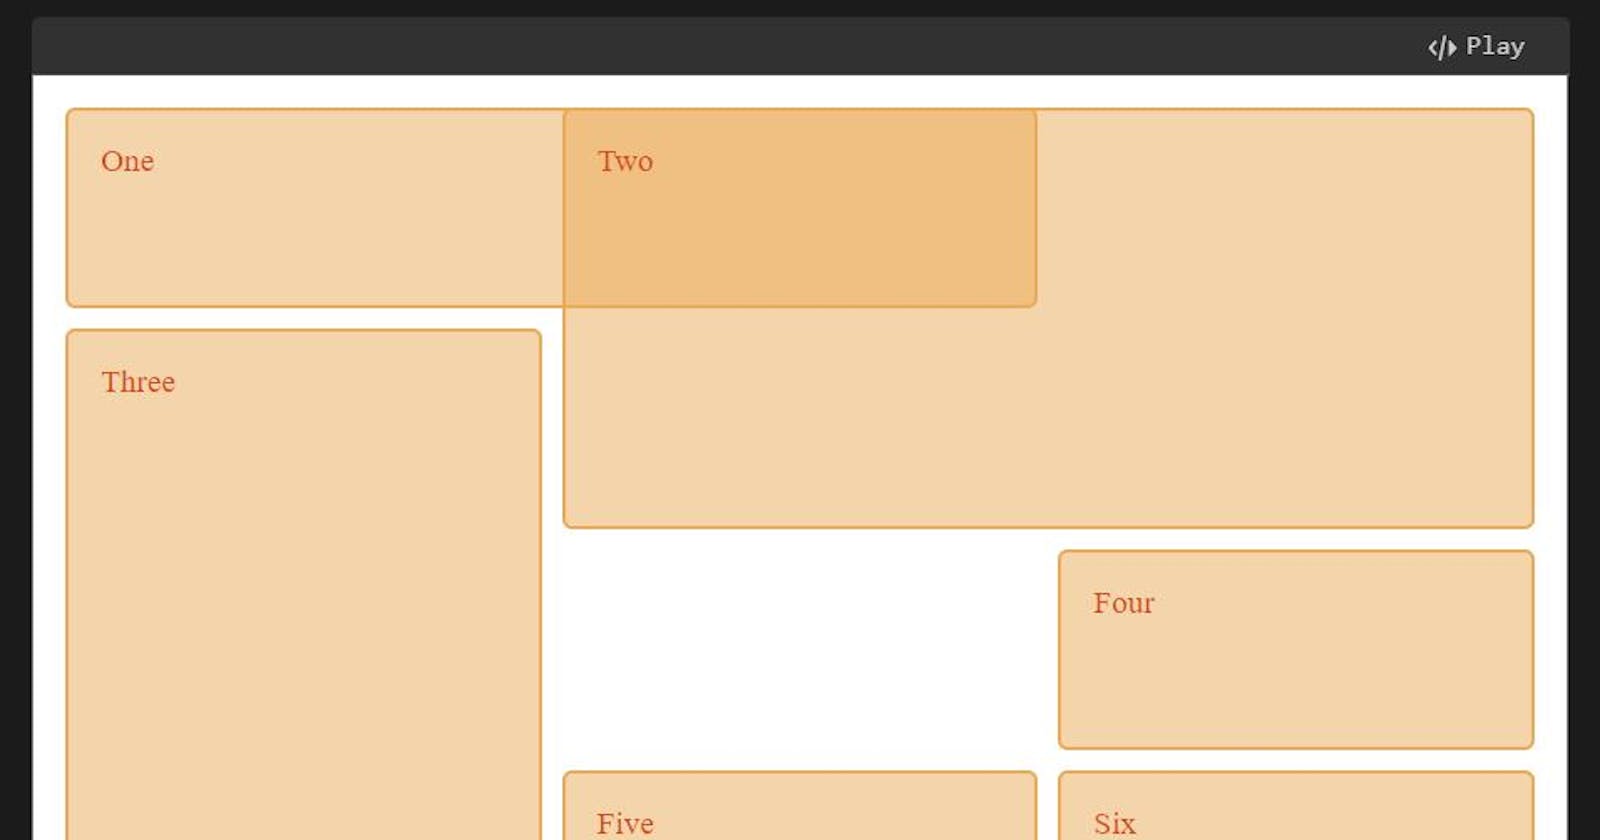 CSS grid layout